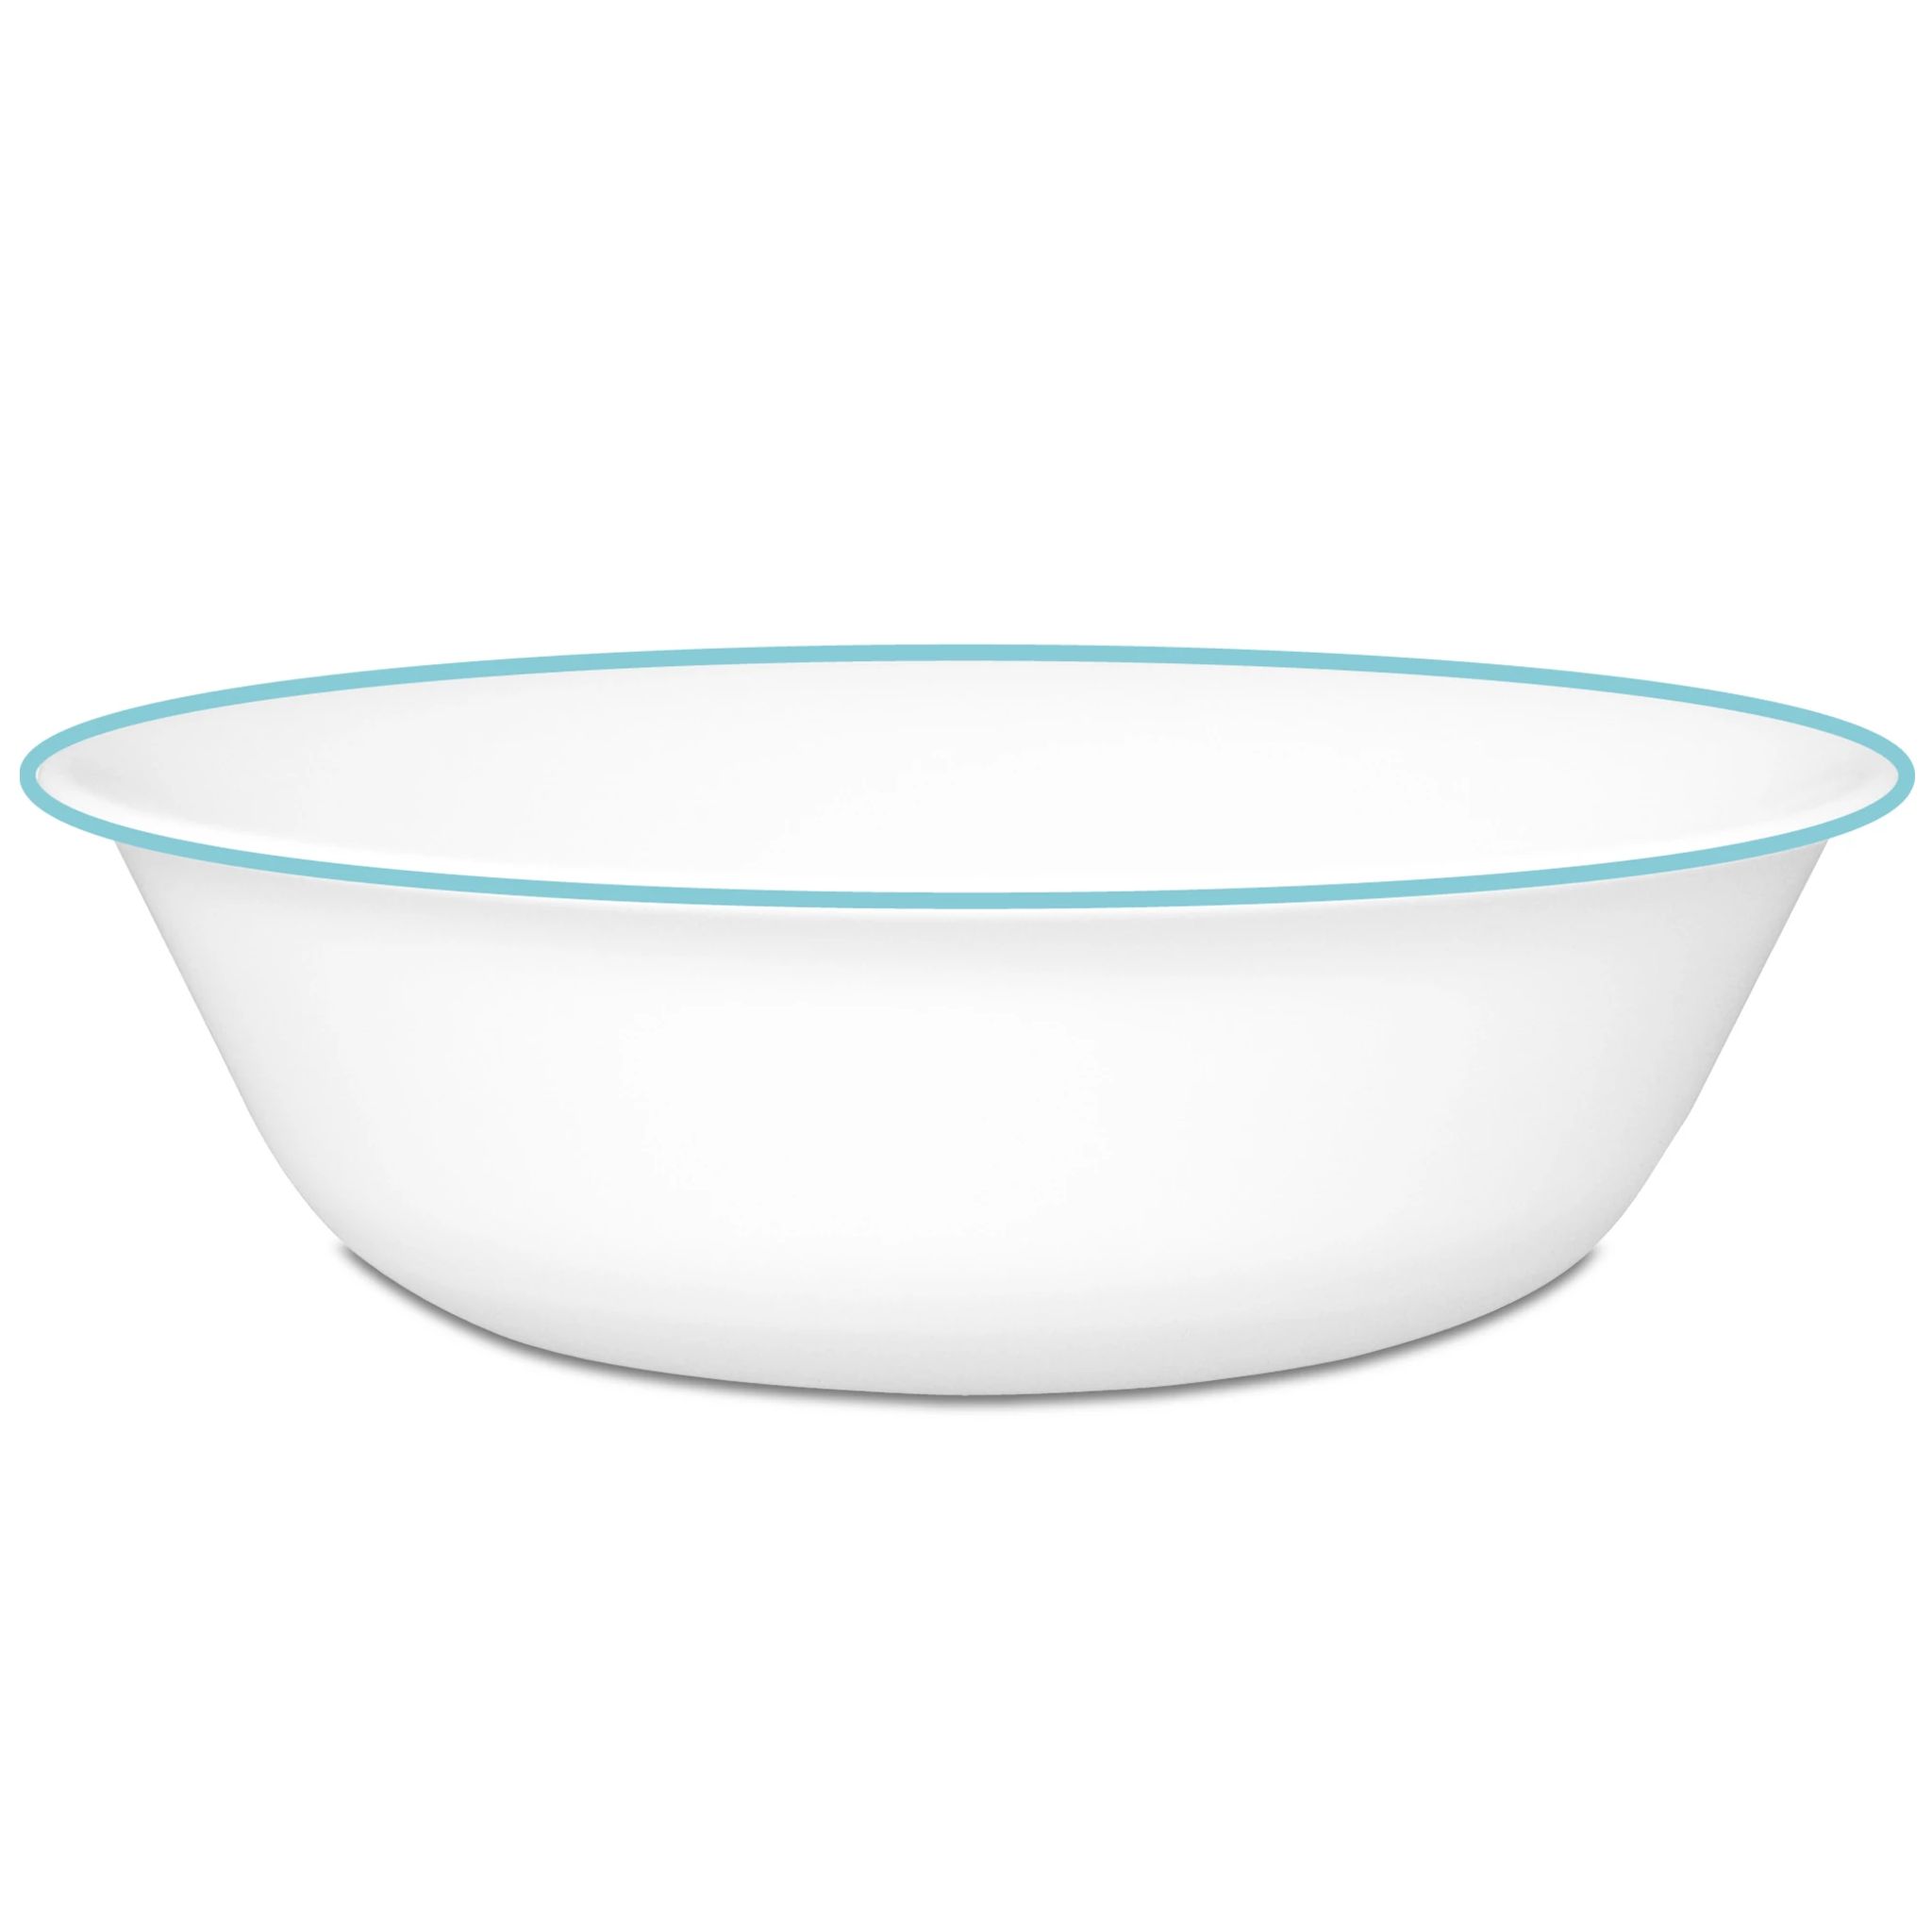 Global Collection Terracotta Dreams 18-ounce Cereal Bowl